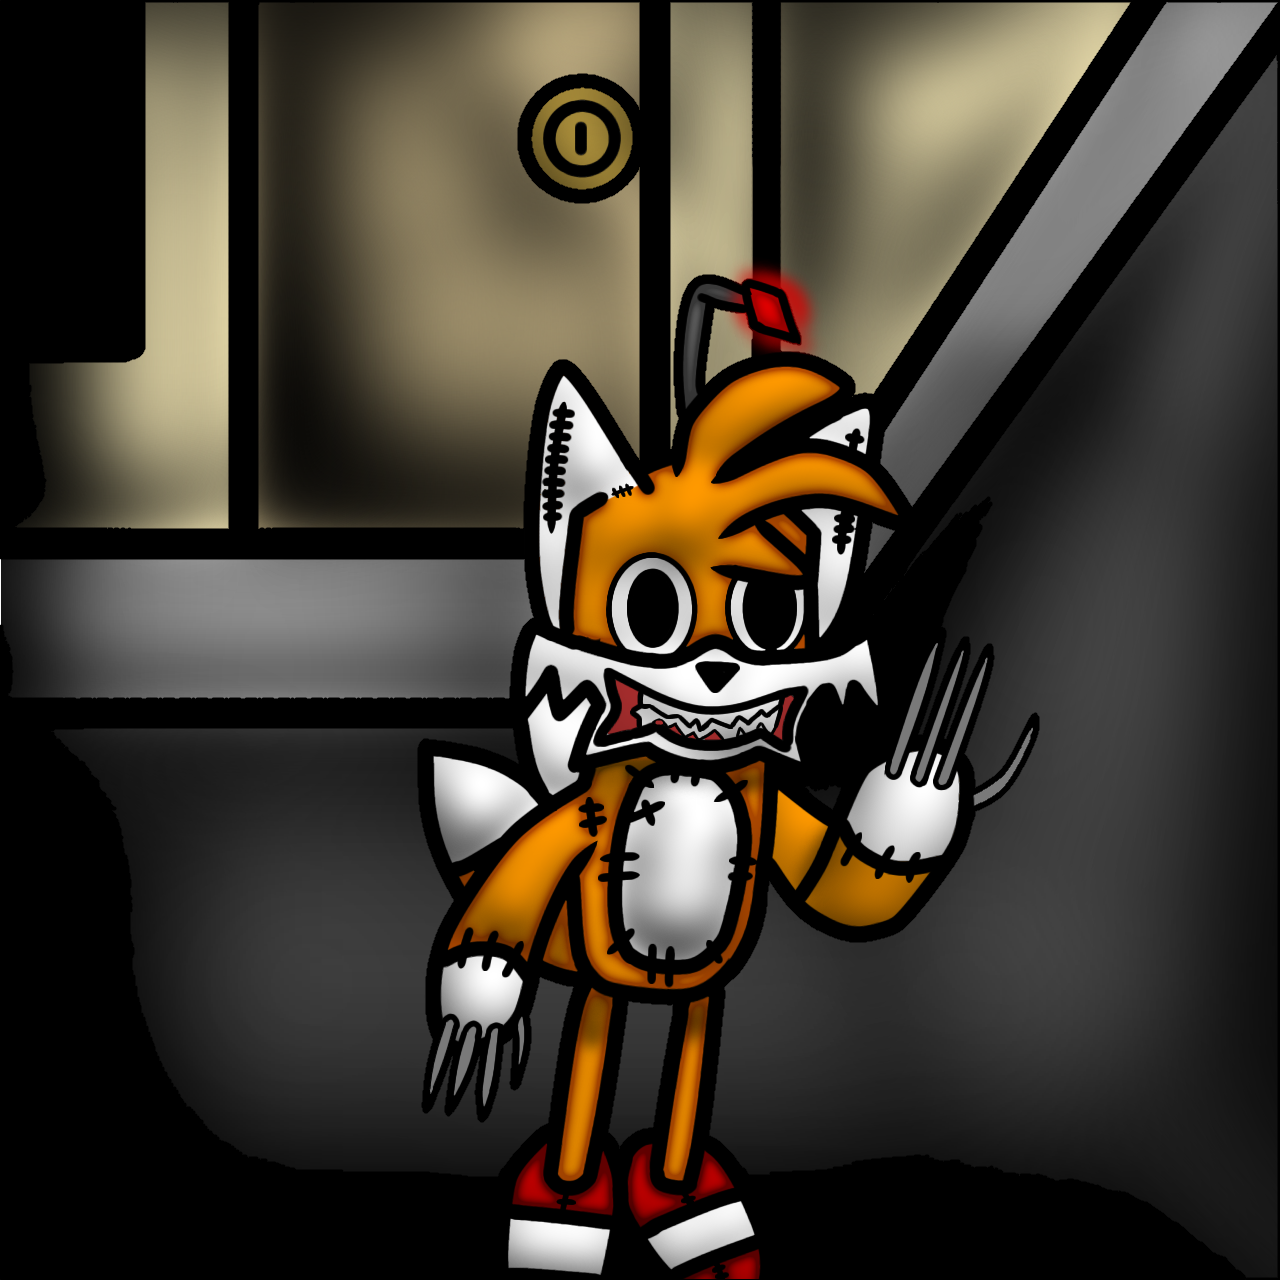 The curse of the tails doll by phantomgirl2510 on DeviantArt